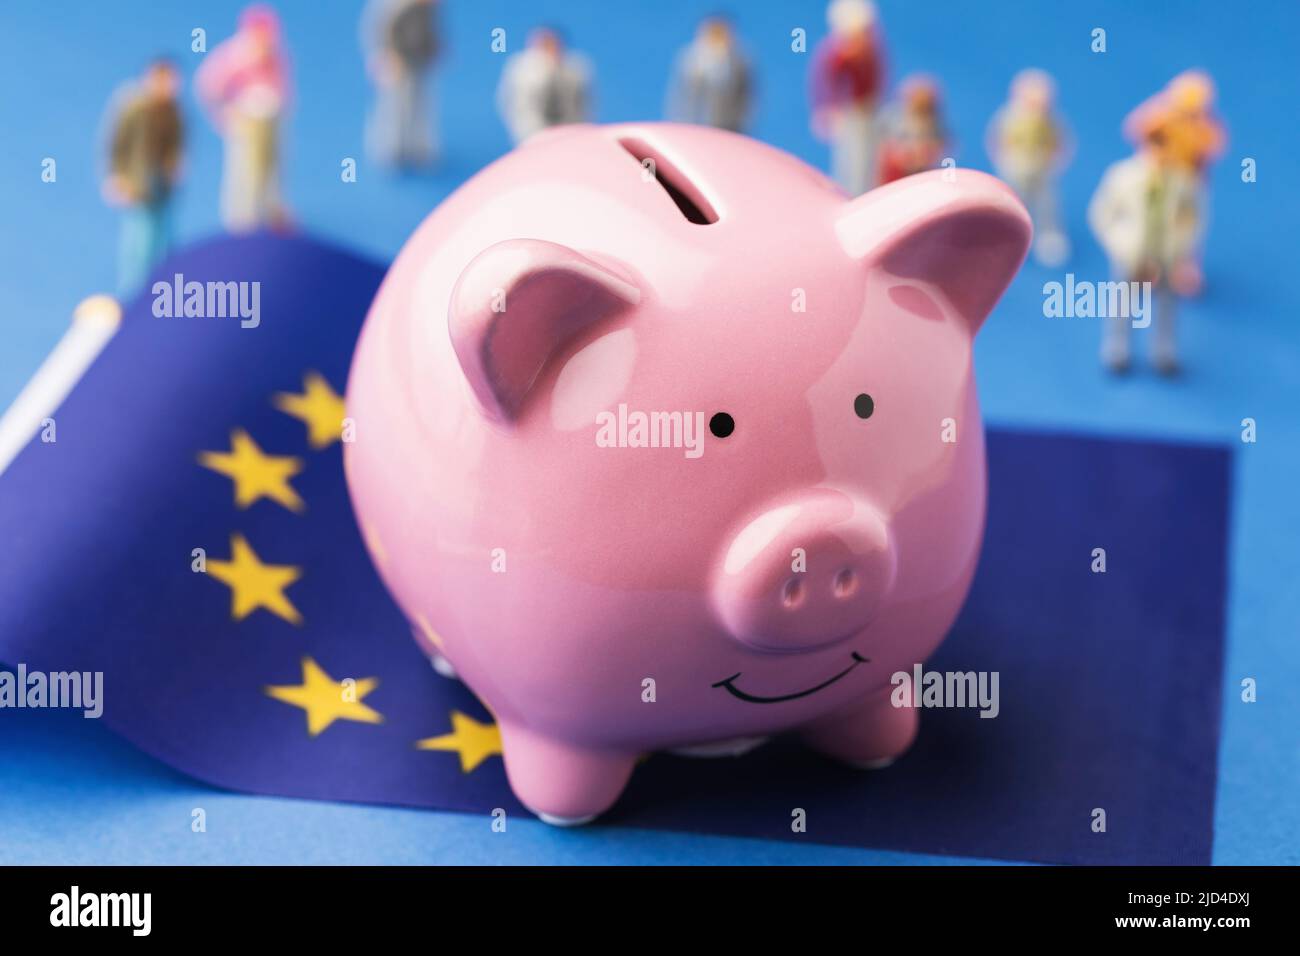 Piggy bank, EU flag and plastic toy people on a colored background, the concept of income in the European Union Stock Photo